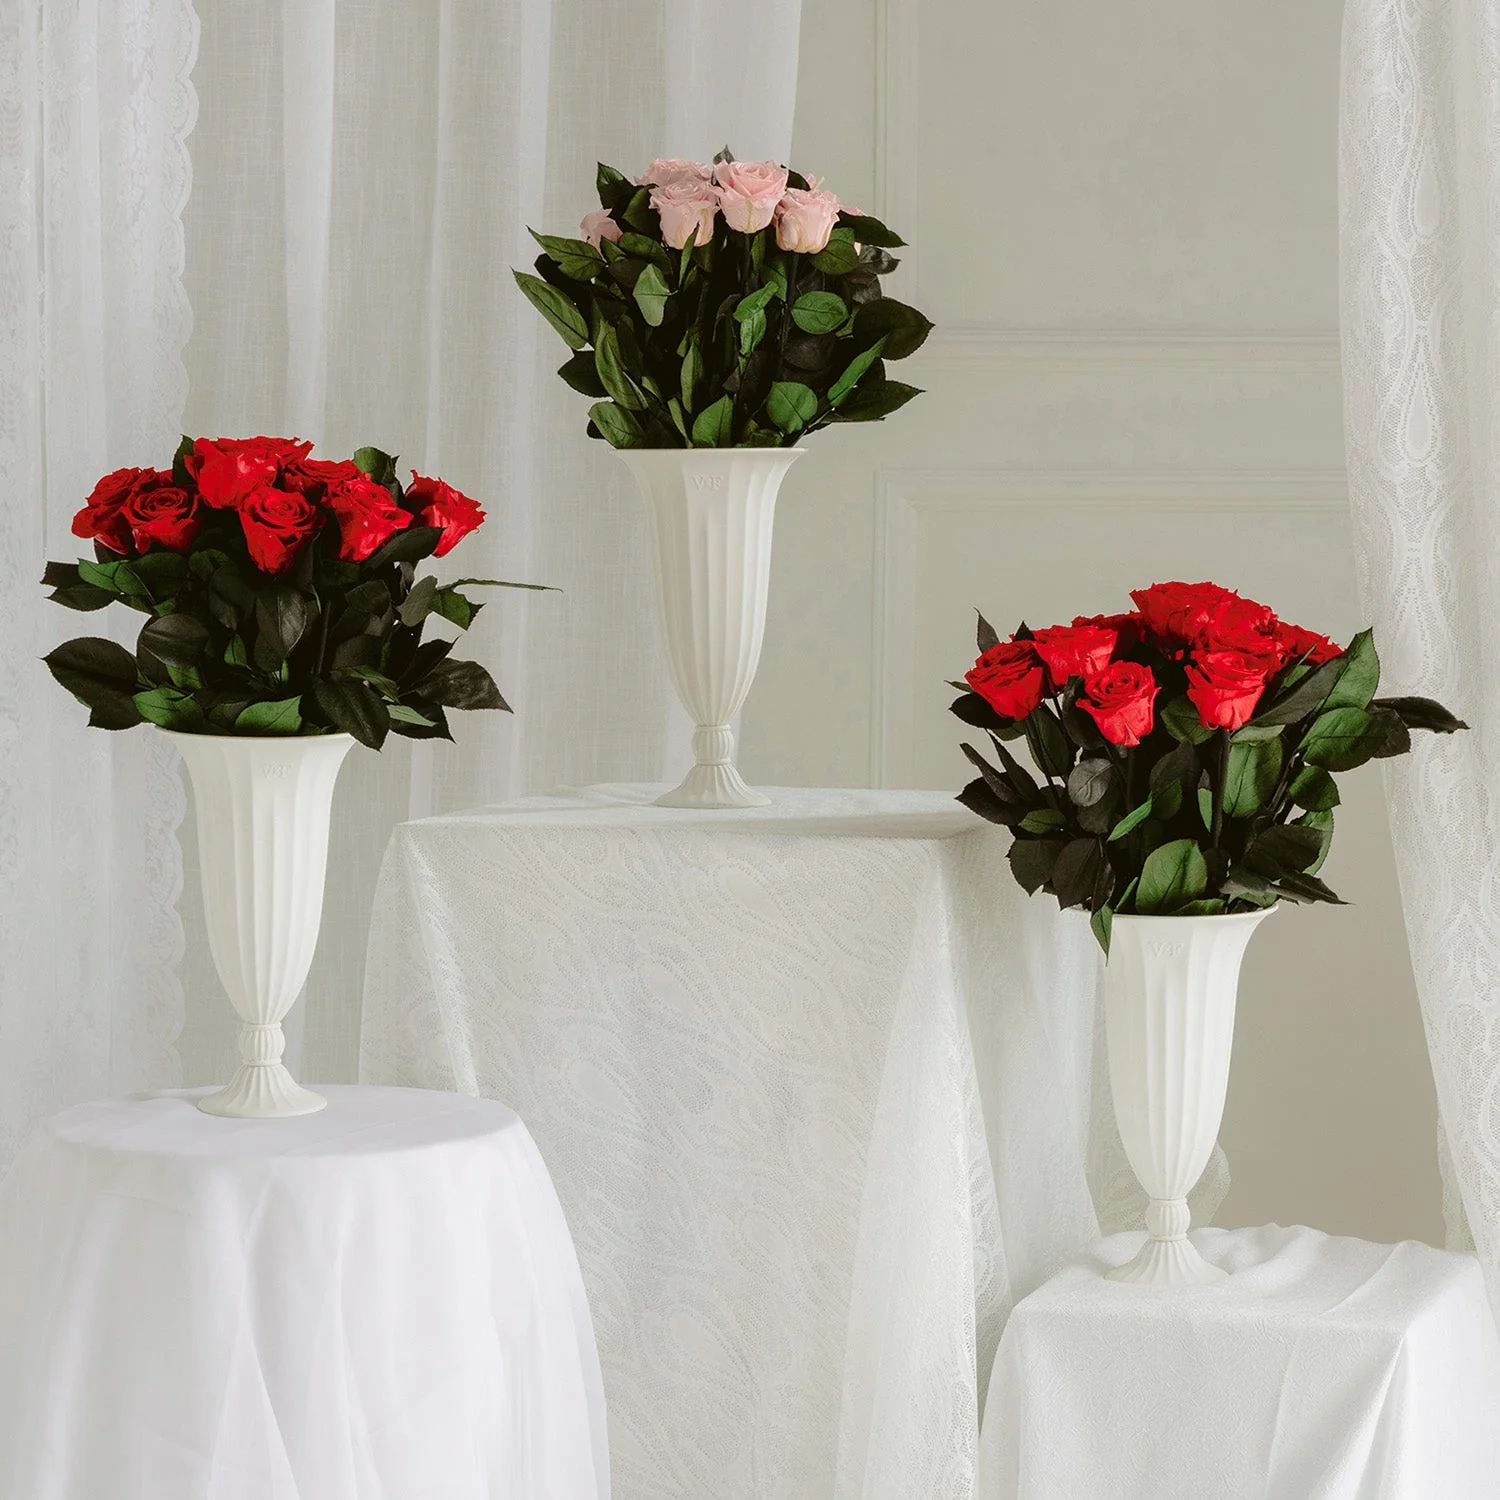 three vases of roses in red and pink